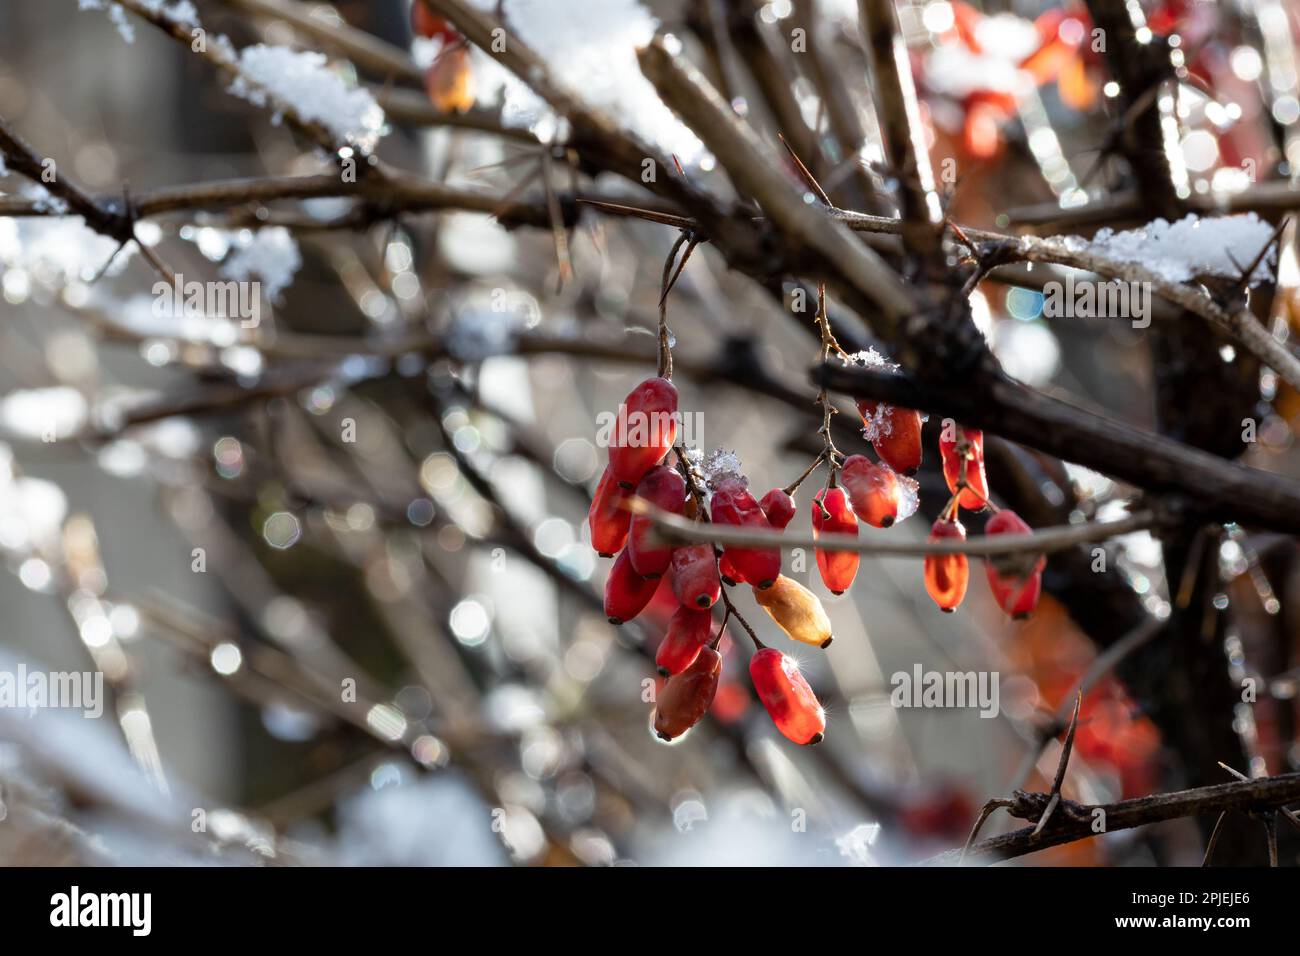 Branches of Berberis vulgaris in winter with red ripe berries. After thawing, a little snow and droplets of frozen water remain on the berries and bra Stock Photo